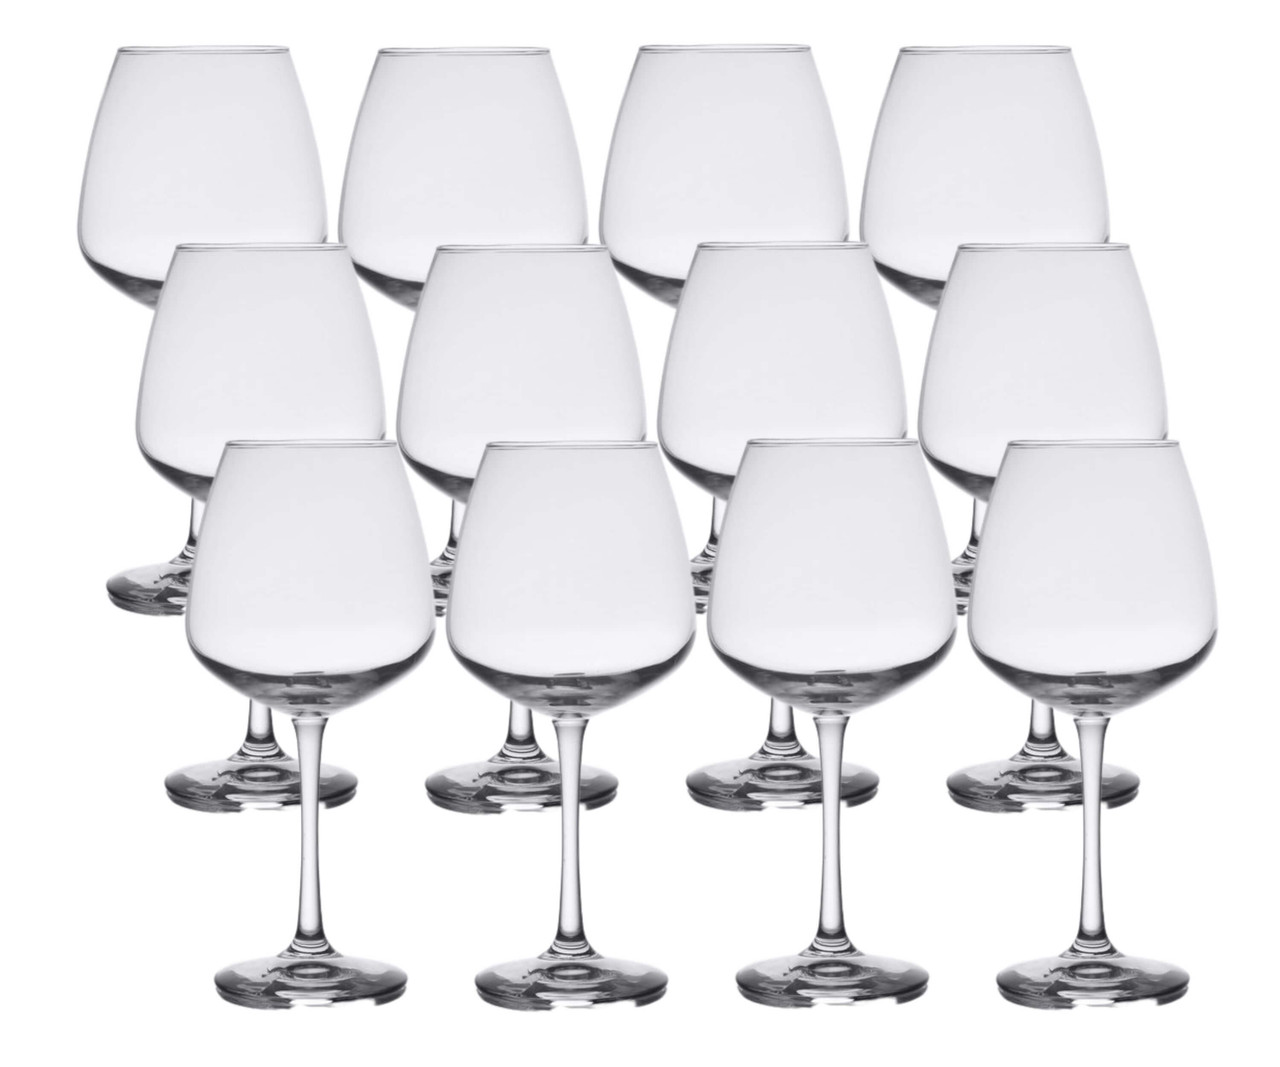 Libbey Vina Red Wine Glasses, 18.25-ounce, Set of 6